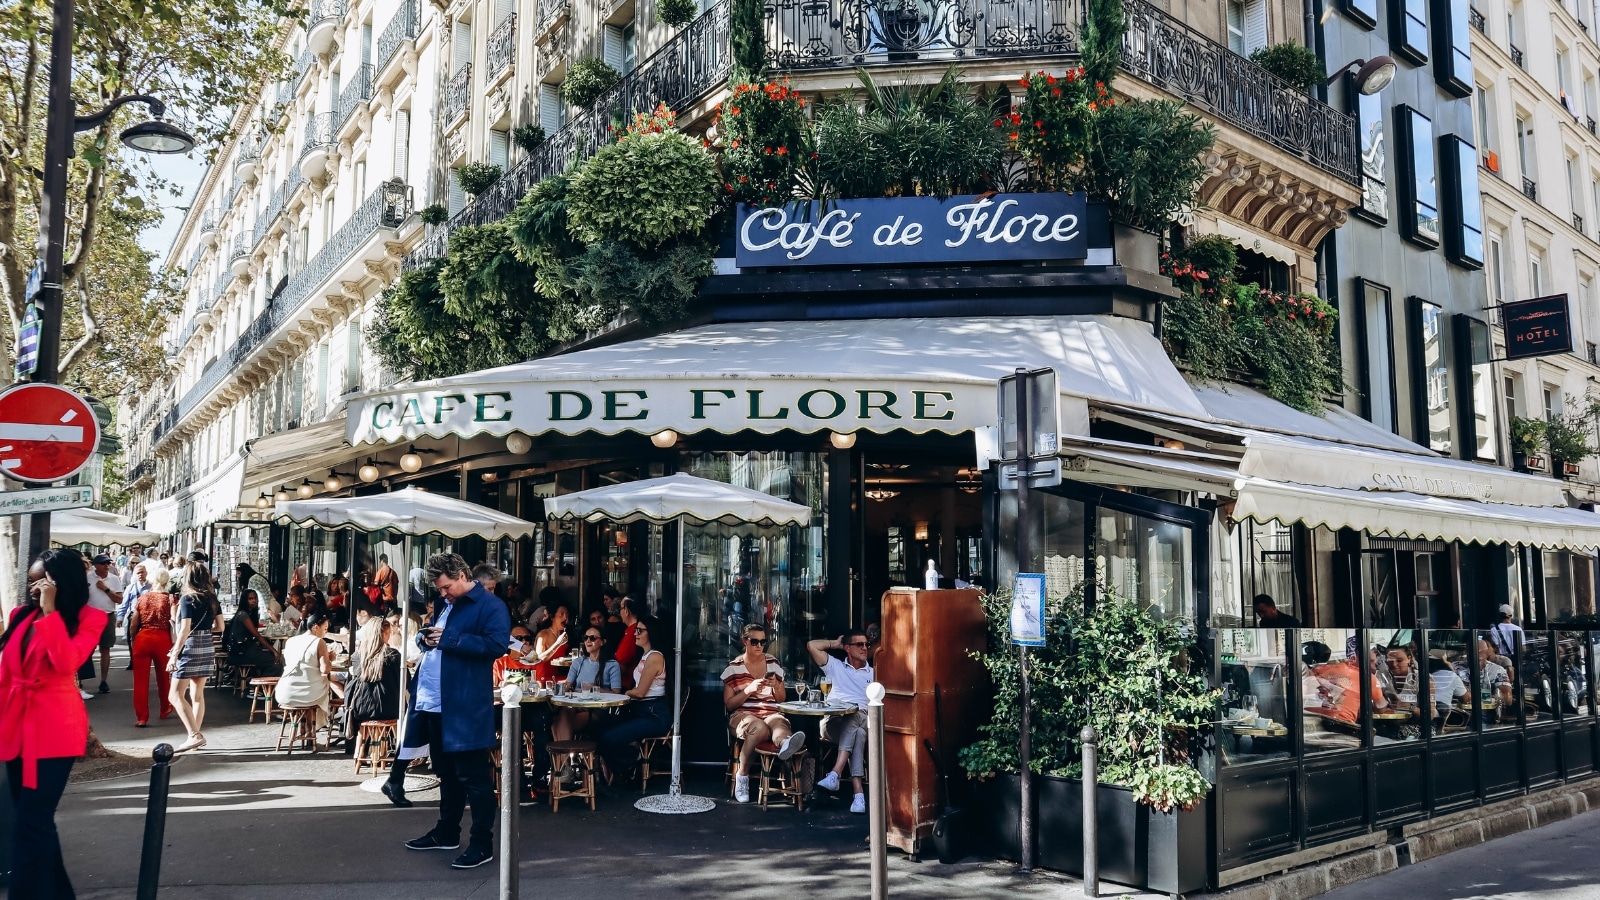 A photograph capturing the facade of the renowned Cafe de Flore on Boulevard Saint-Germain. The image highlights the exterior of the establishment, featuring architectural elements consistent with traditional Parisian design. 